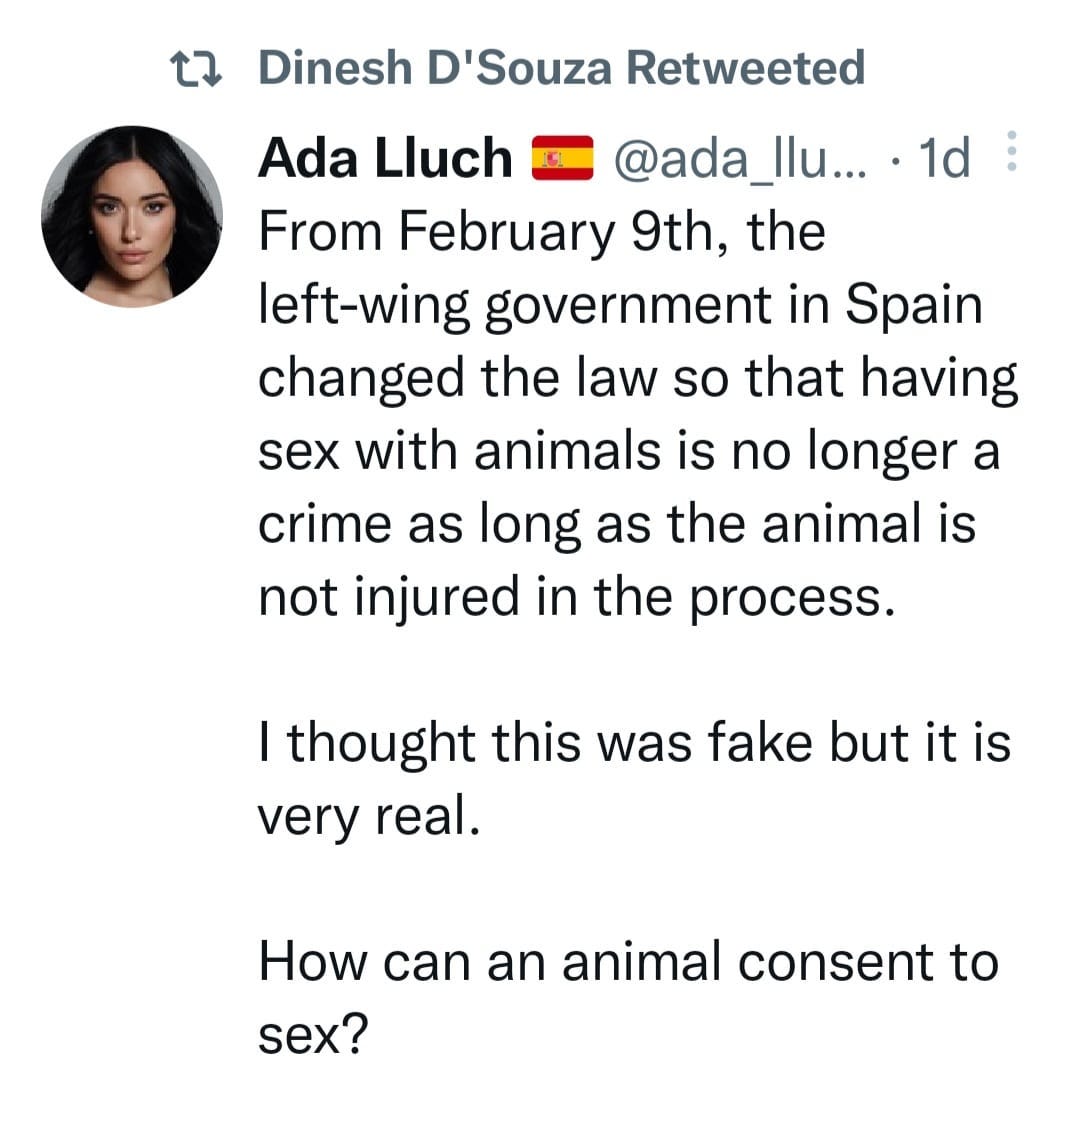 May be an image of 1 person and text that says '× Dines 'Souza Retweeted 1d Ada Lluch @ada_llu.. From February 9th, the left-wing government in Spain changed the law so that having sex with animals is no longer a crime as long as the animal is not injured in the process. thought this was fake but it is very real. How can an animal consent to sex?'